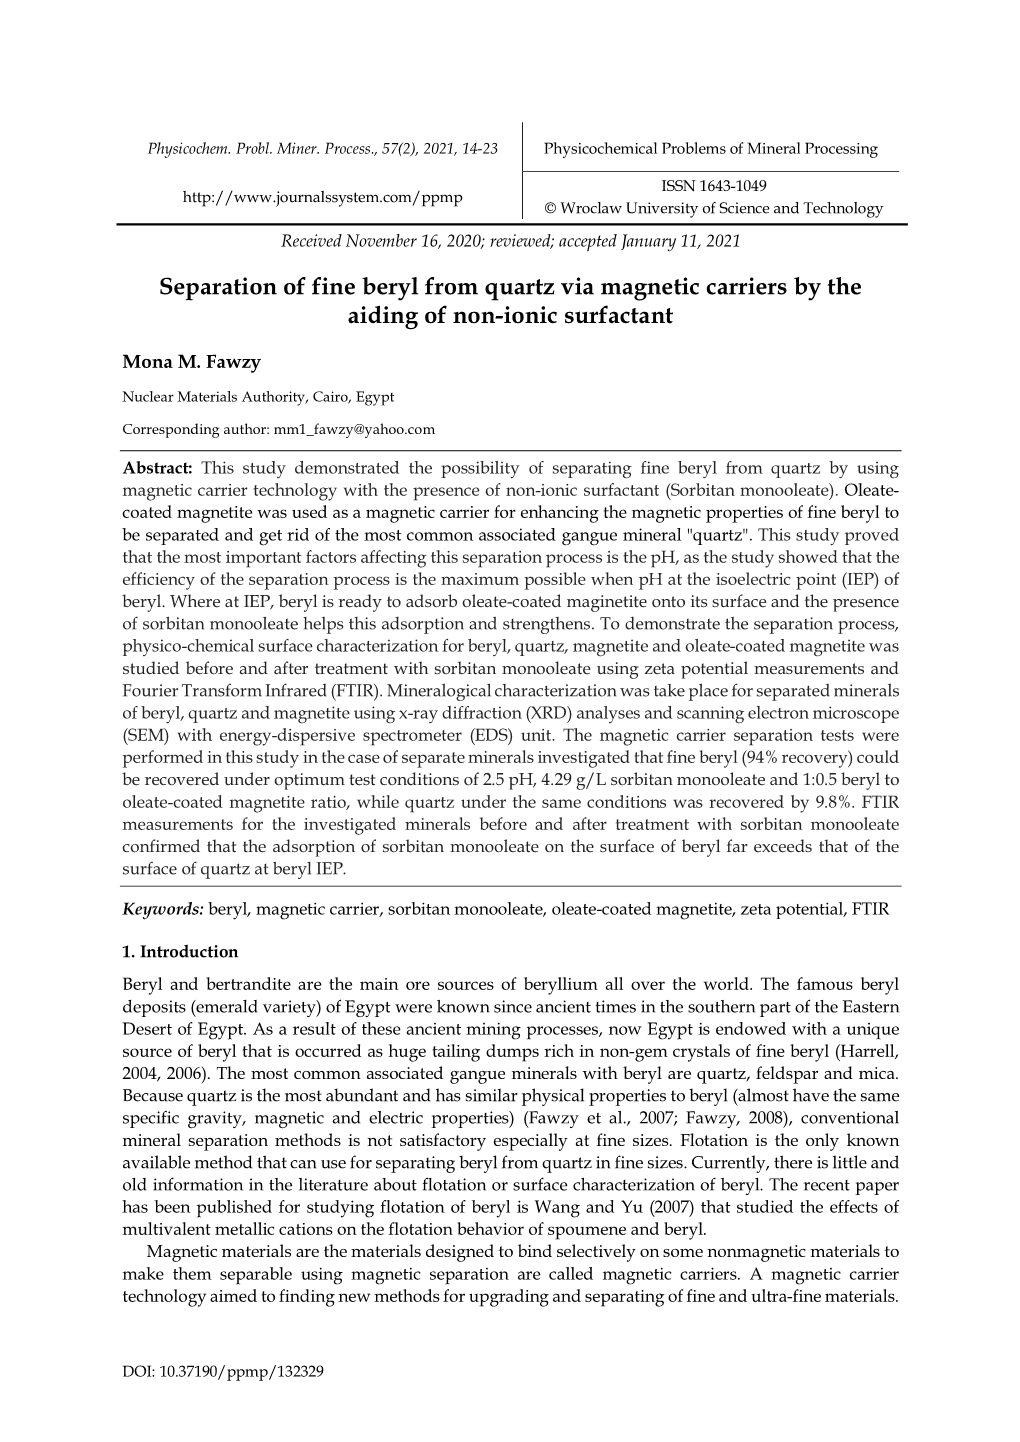 Separation of Fine Beryl from Quartz Via Magnetic Carriers by the Aiding of Non-Ionic Surfactant